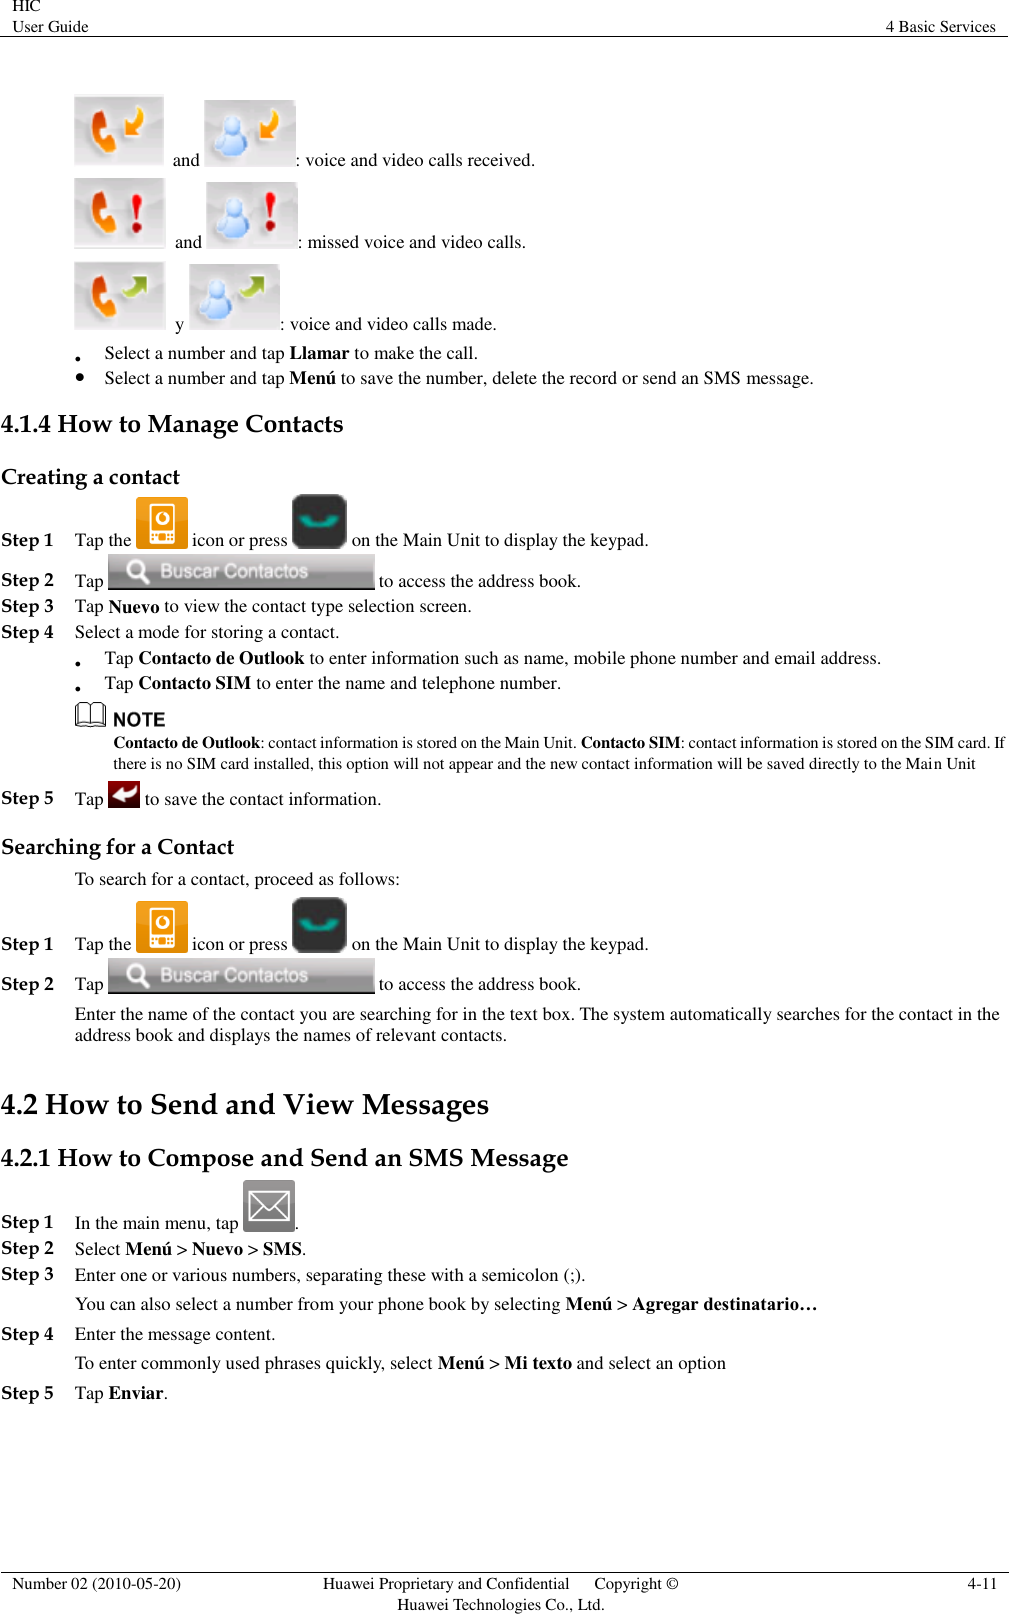 HIC User Guide 4 Basic Services  Number 02 (2010-05-20) Huawei Proprietary and Confidential      Copyright © Huawei Technologies Co., Ltd. 4-11   and  : voice and video calls received.  and  : missed voice and video calls.  y  : voice and video calls made.  Select a number and tap Llamar to make the call.  Select a number and tap Menú to save the number, delete the record or send an SMS message.  4.1.4 How to Manage Contacts Creating a contact Step 1 Tap the   icon or press   on the Main Unit to display the keypad. Step 2 Tap   to access the address book. Step 3 Tap Nuevo to view the contact type selection screen. Step 4 Select a mode for storing a contact.  Tap Contacto de Outlook to enter information such as name, mobile phone number and email address.  Tap Contacto SIM to enter the name and telephone number.  Contacto de Outlook: contact information is stored on the Main Unit. Contacto SIM: contact information is stored on the SIM card. If there is no SIM card installed, this option will not appear and the new contact information will be saved directly to the Main Unit Step 5 Tap   to save the contact information. Searching for a Contact To search for a contact, proceed as follows: Step 1 Tap the   icon or press   on the Main Unit to display the keypad. Step 2 Tap   to access the address book. Enter the name of the contact you are searching for in the text box. The system automatically searches for the contact in the address book and displays the names of relevant contacts. 4.2 How to Send and View Messages 4.2.1 How to Compose and Send an SMS Message Step 1 In the main menu, tap  . Step 2 Select Menú &gt; Nuevo &gt; SMS. Step 3 Enter one or various numbers, separating these with a semicolon (;). You can also select a number from your phone book by selecting Menú &gt; Agregar destinatario… Step 4 Enter the message content. To enter commonly used phrases quickly, select Menú &gt; Mi texto and select an option Step 5 Tap Enviar. 